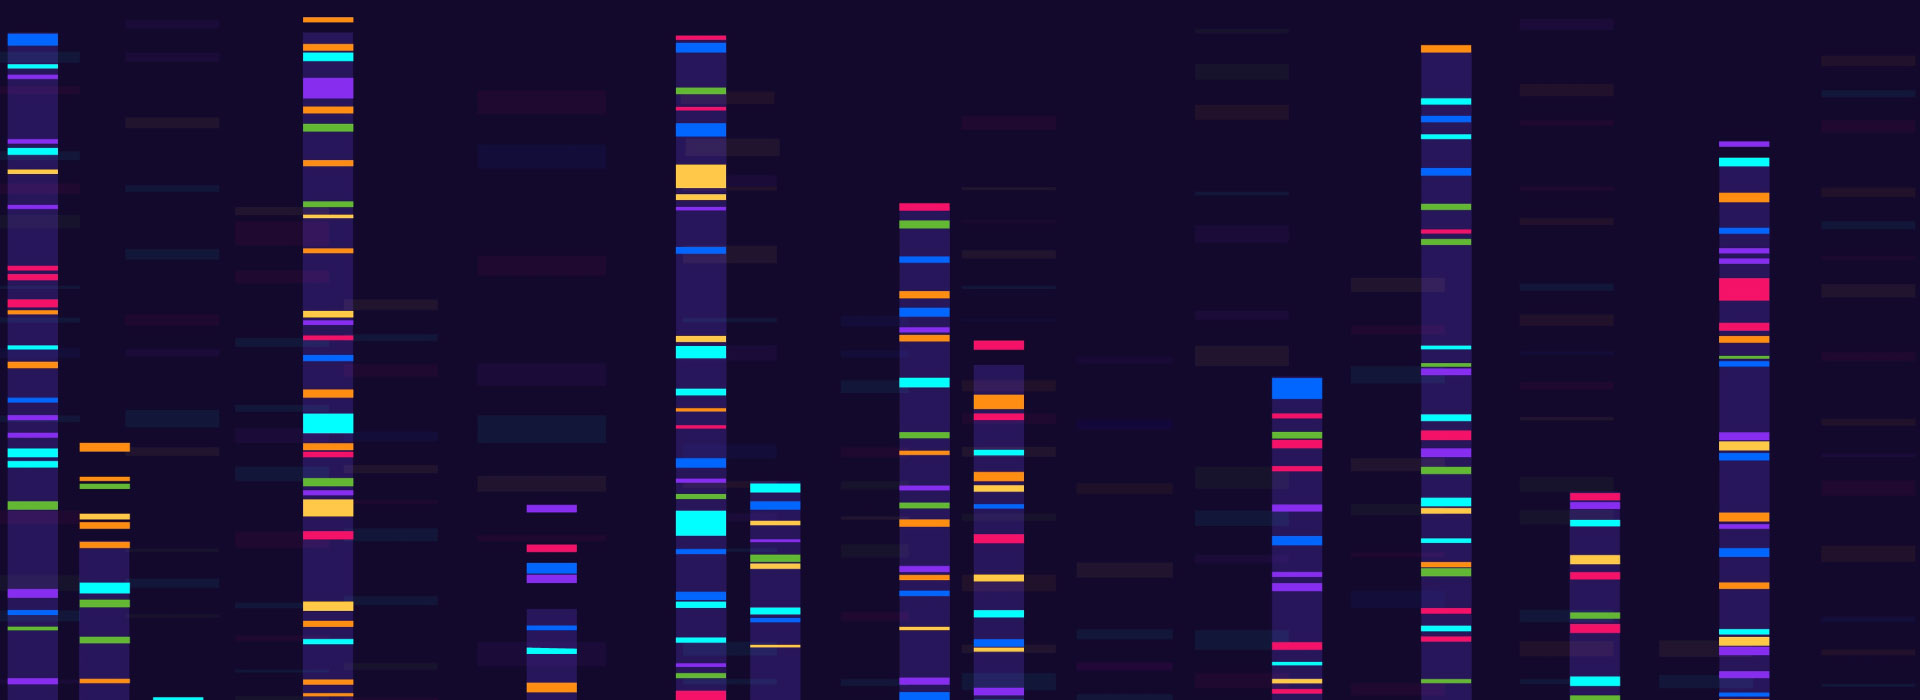 dna-sequencing-image